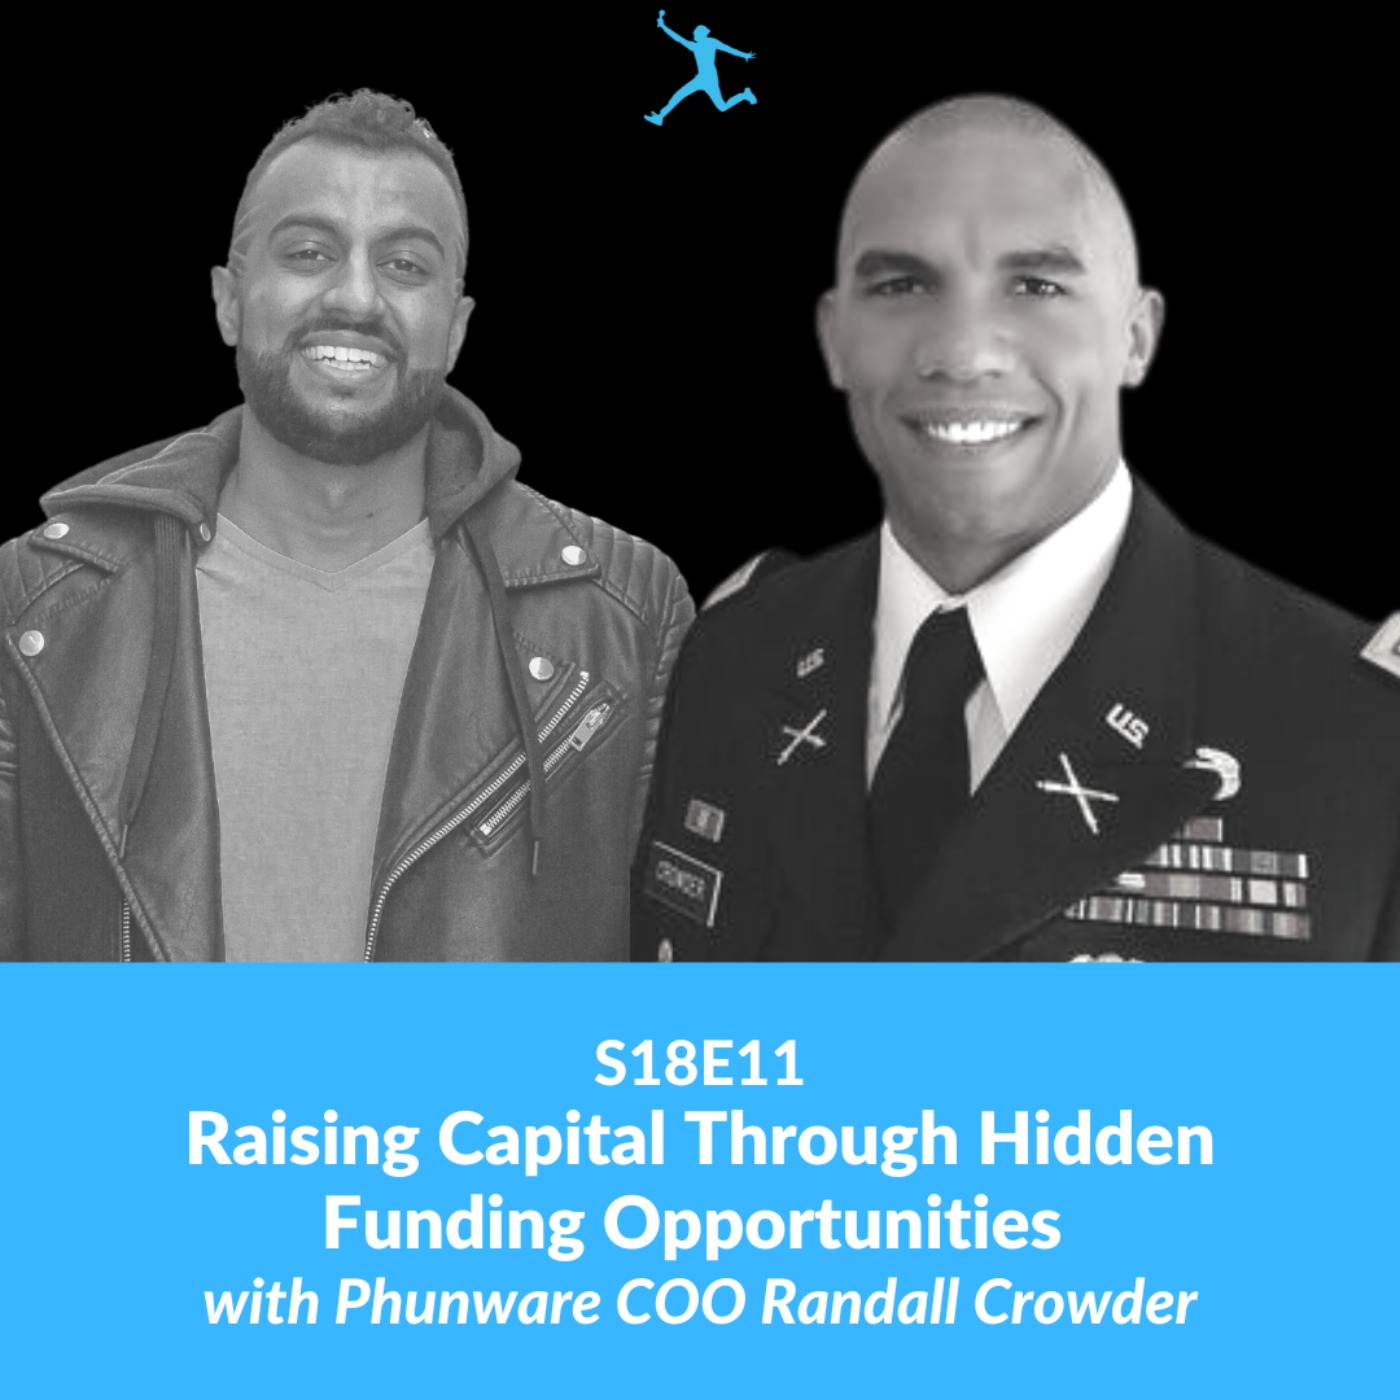 S18E11: Raising Capital Through Hidden Funding Opportunities with Phunware COO Randall Crowder